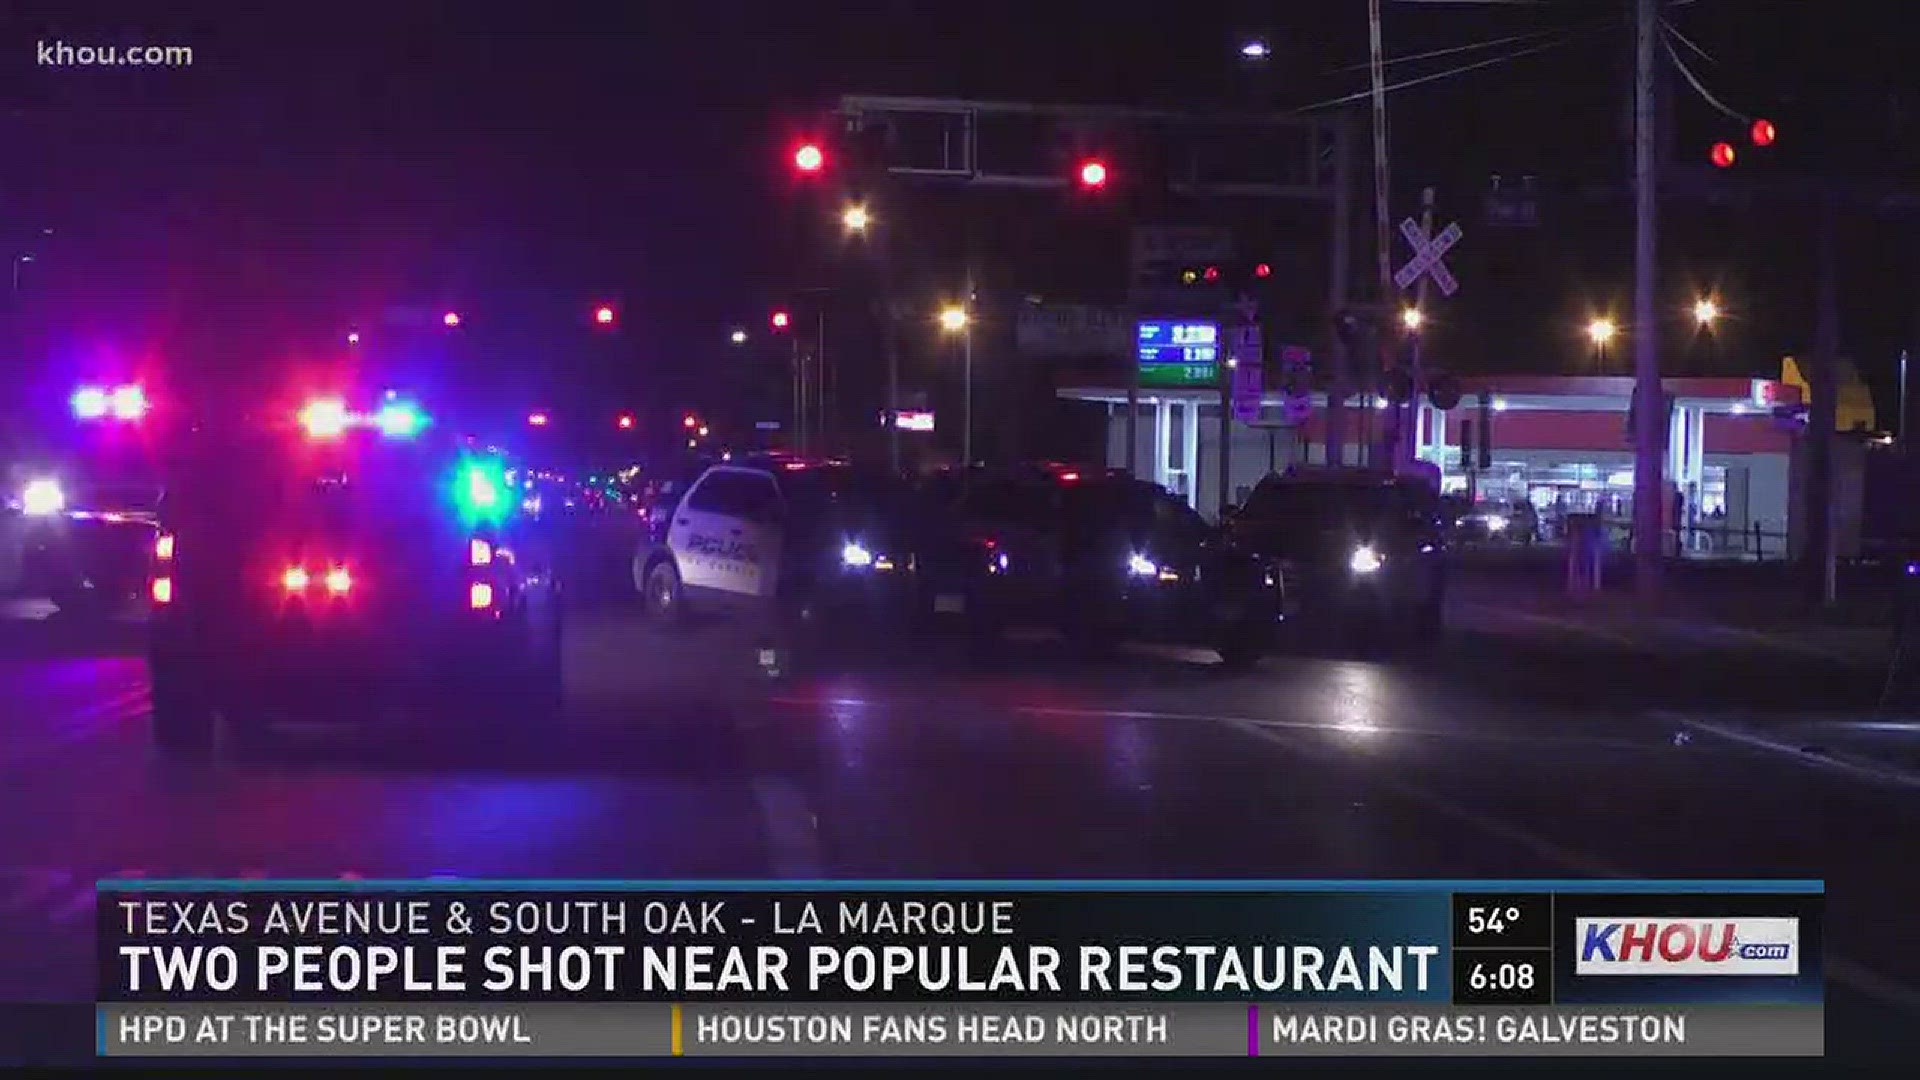 A man was fatally shot and a woman was injured following a disturbance outside a popular La Marque restaurant early Saturday morning.